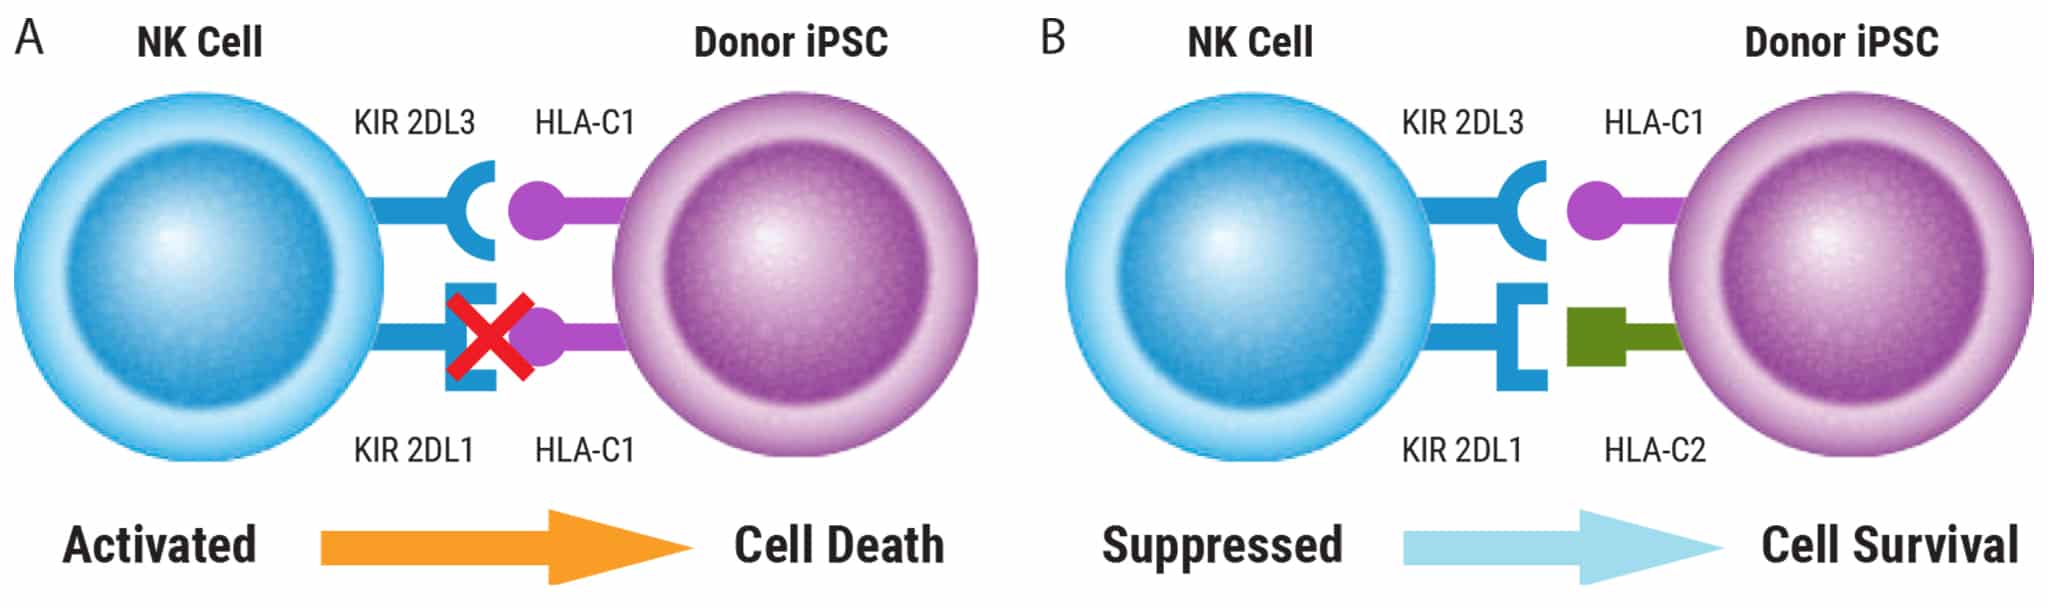 NK-cell@2x